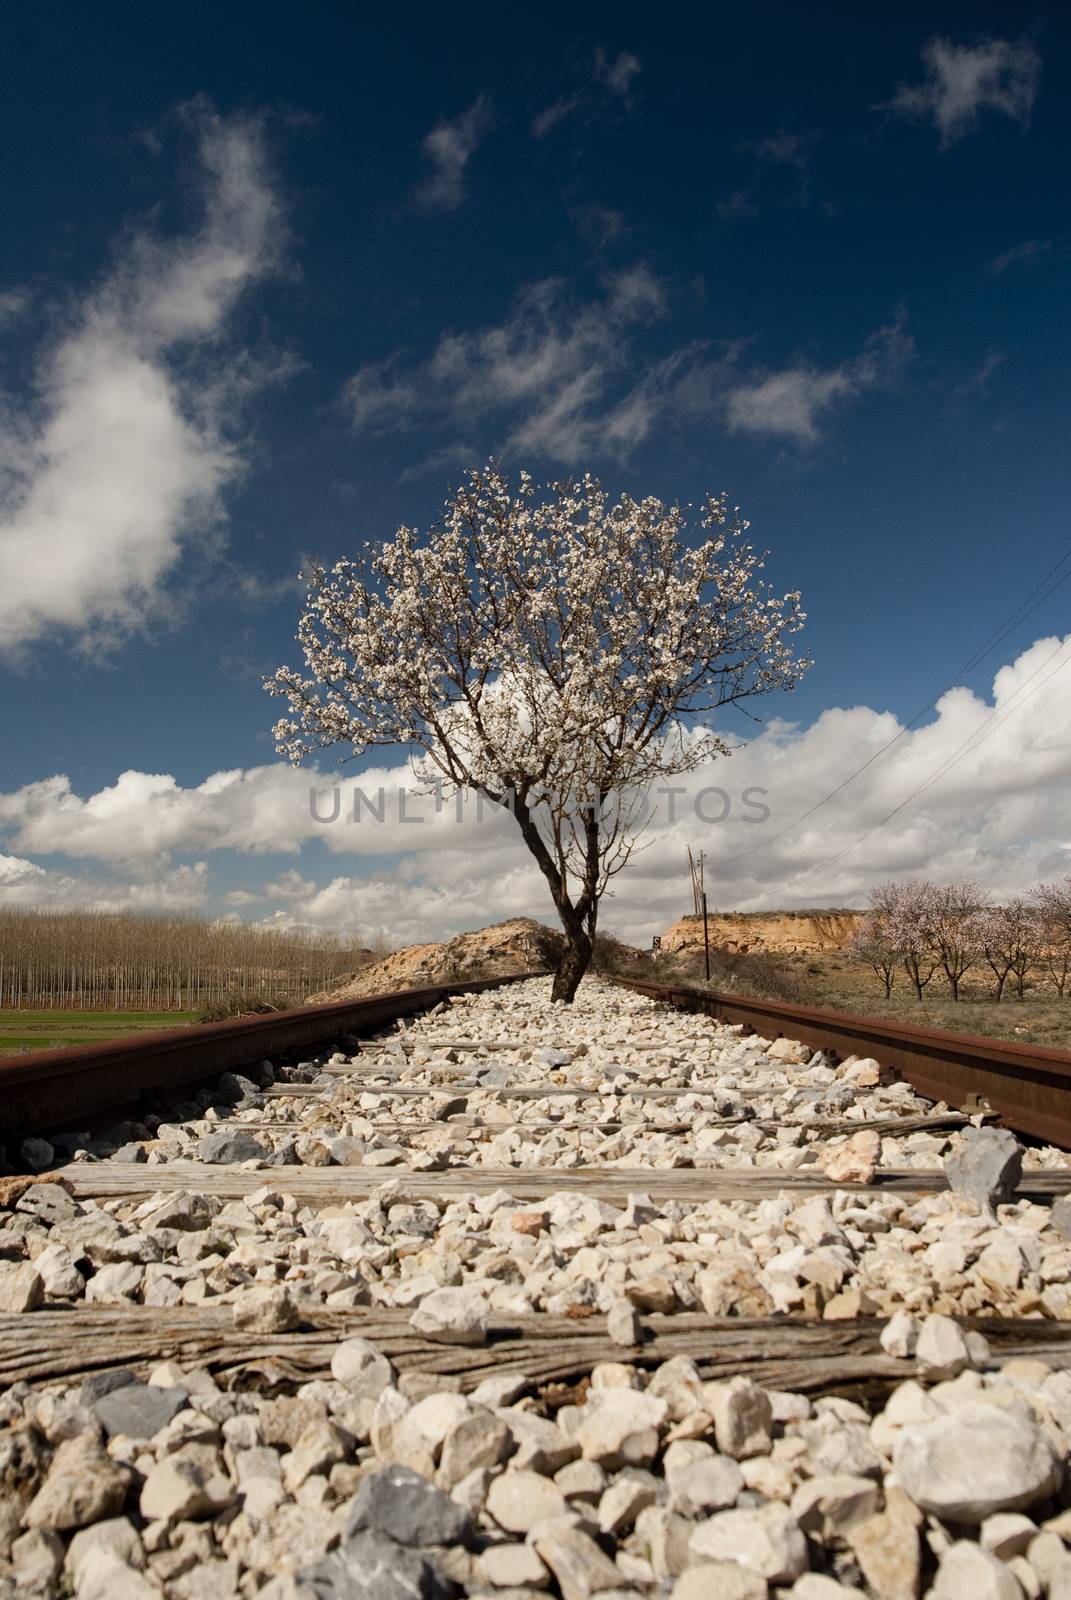 Almond tree in flower occupying some old railroad tracks by jalonsohu@gmail.com